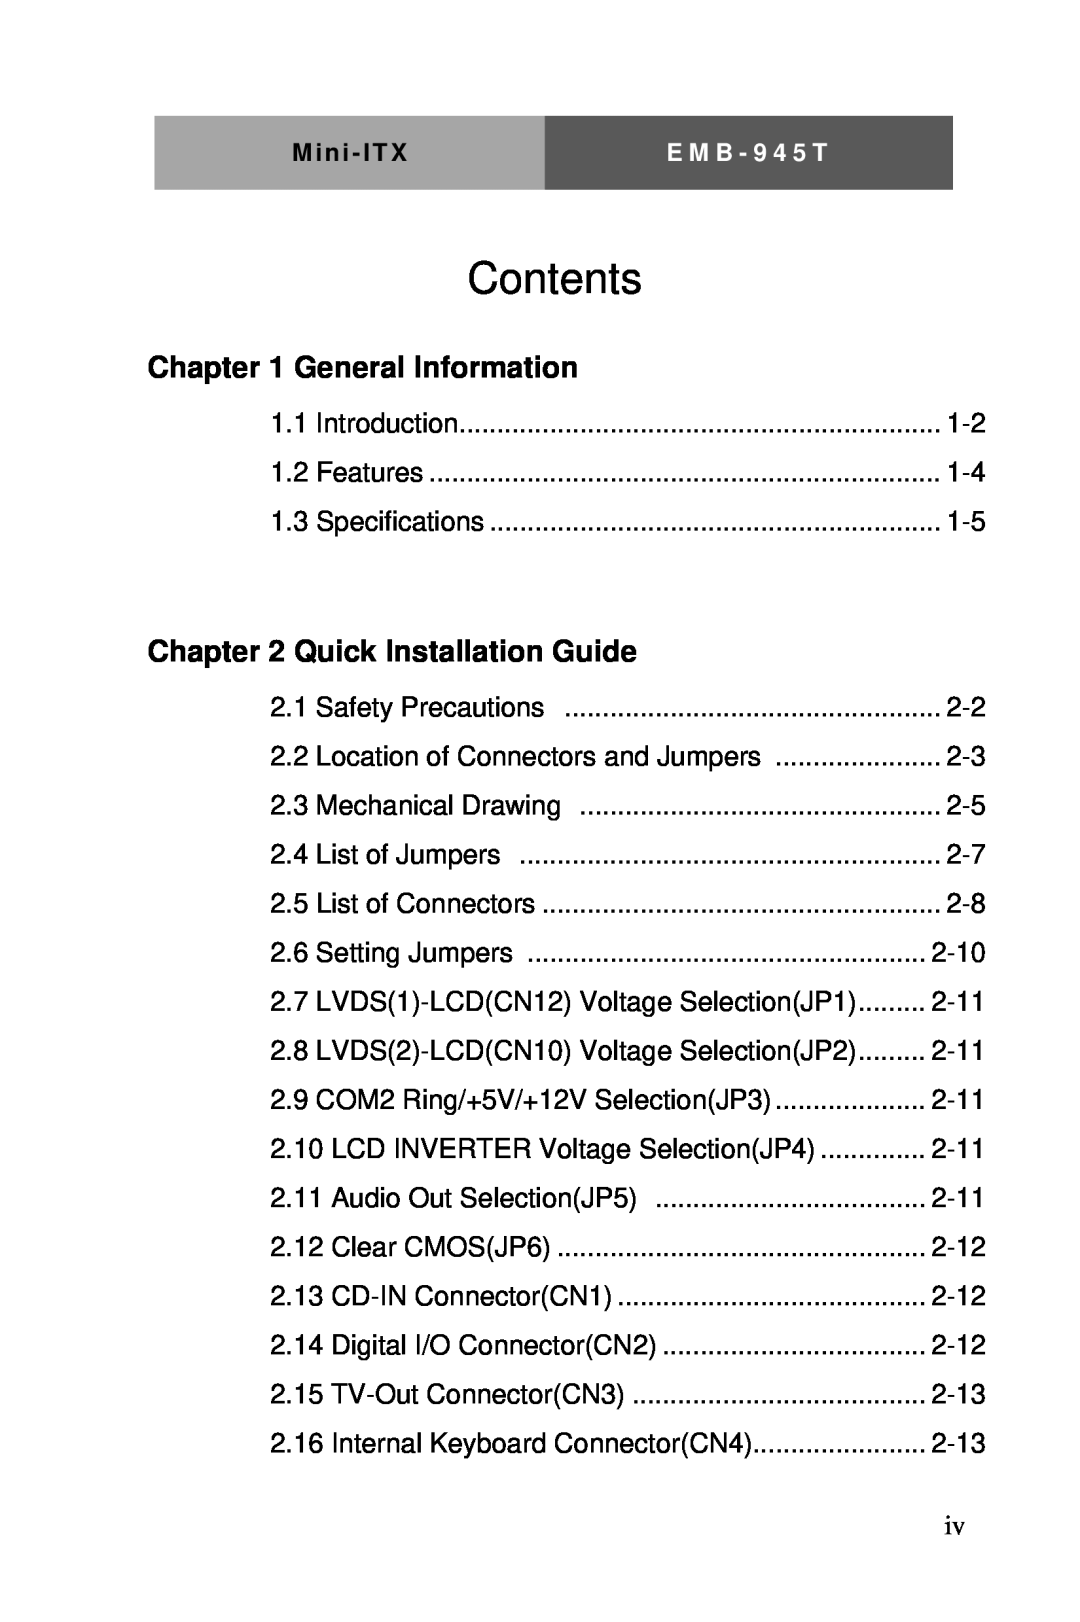 Intel EMB-945T manual Contents, General Information, Quick Installation Guide 